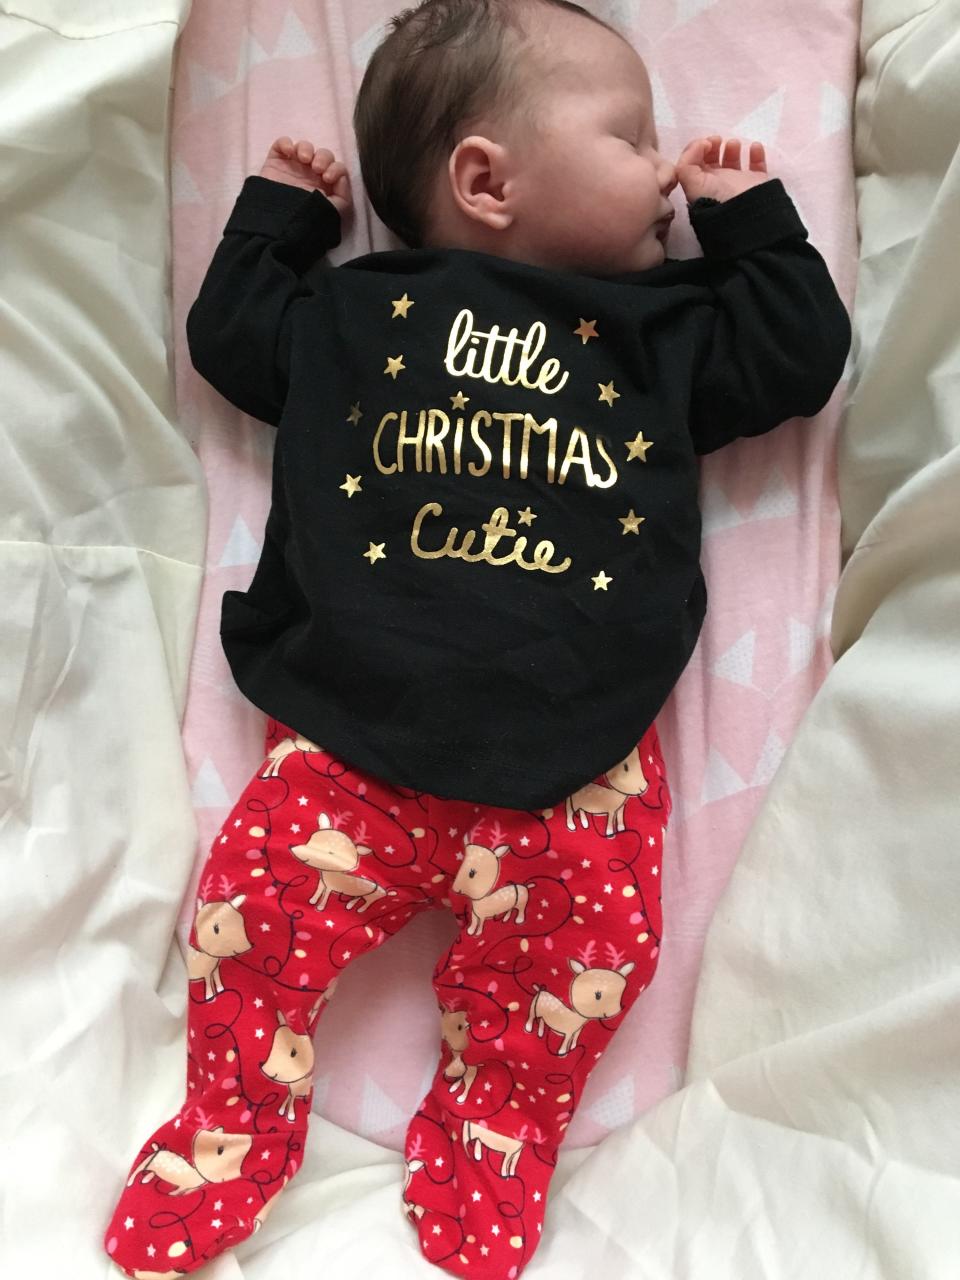 Sofia looking cute in her Christmas clothes (Collect/PA Real Life)
